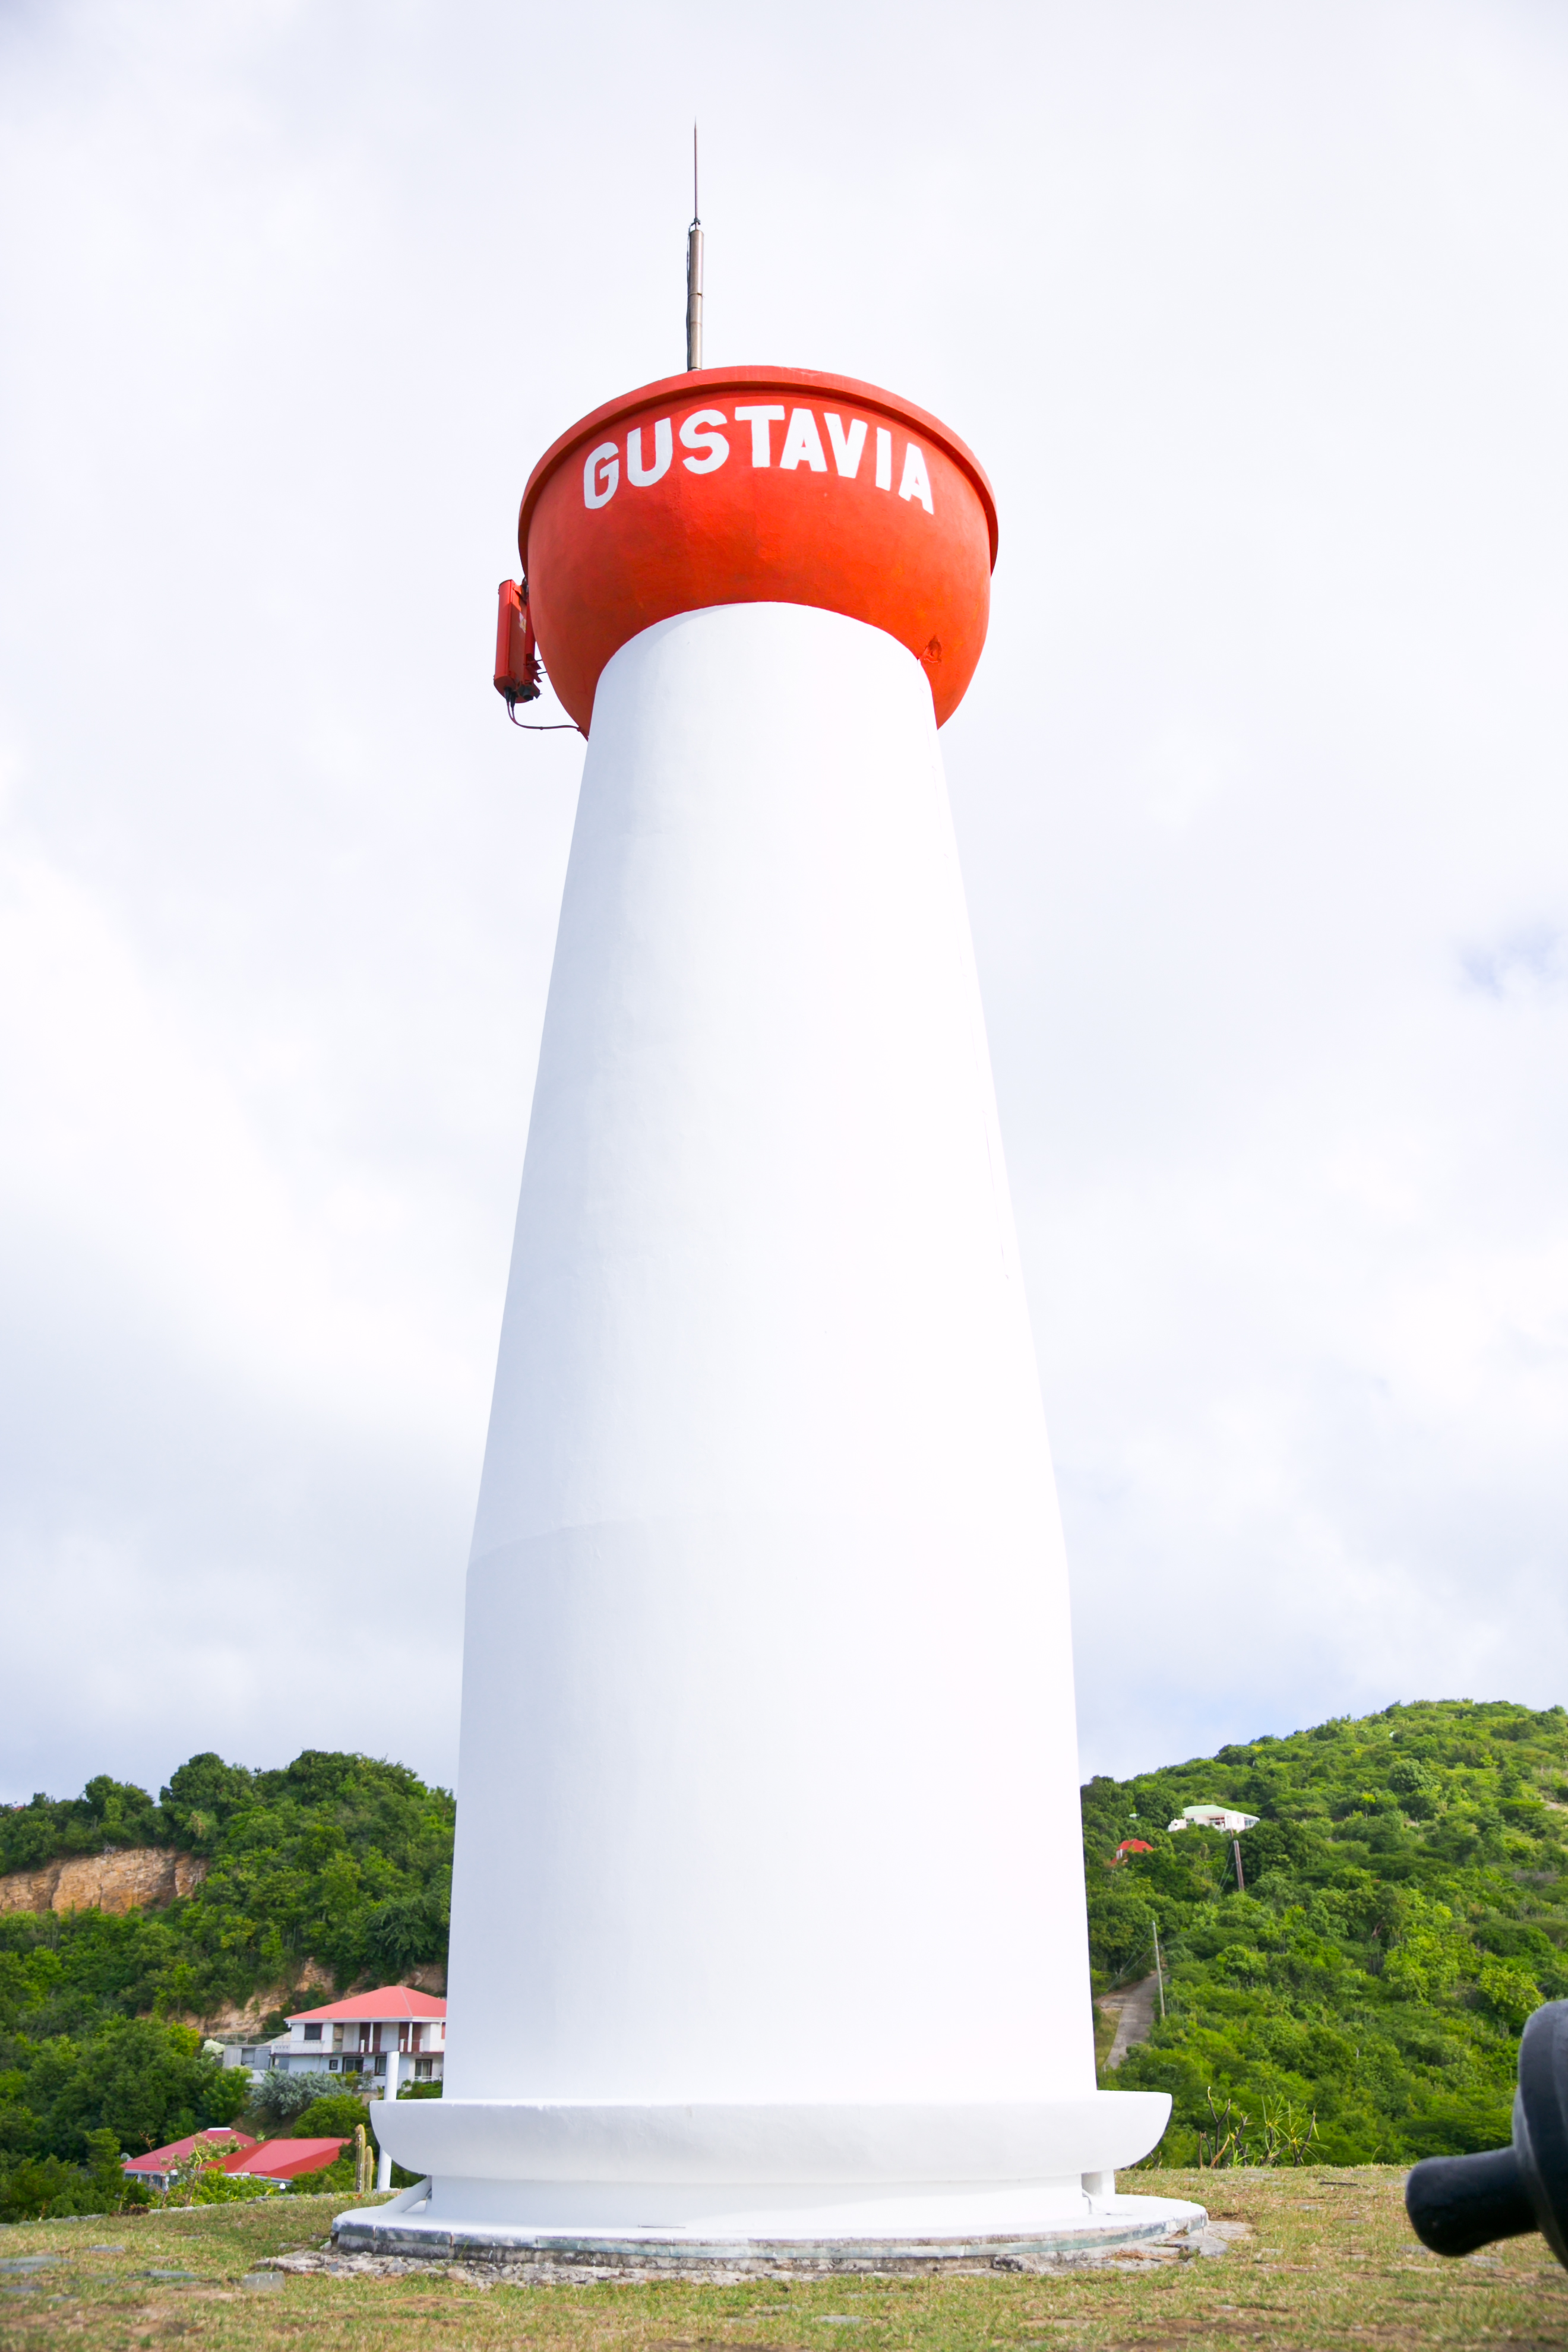 Gustavia Lighthouse in St Barth